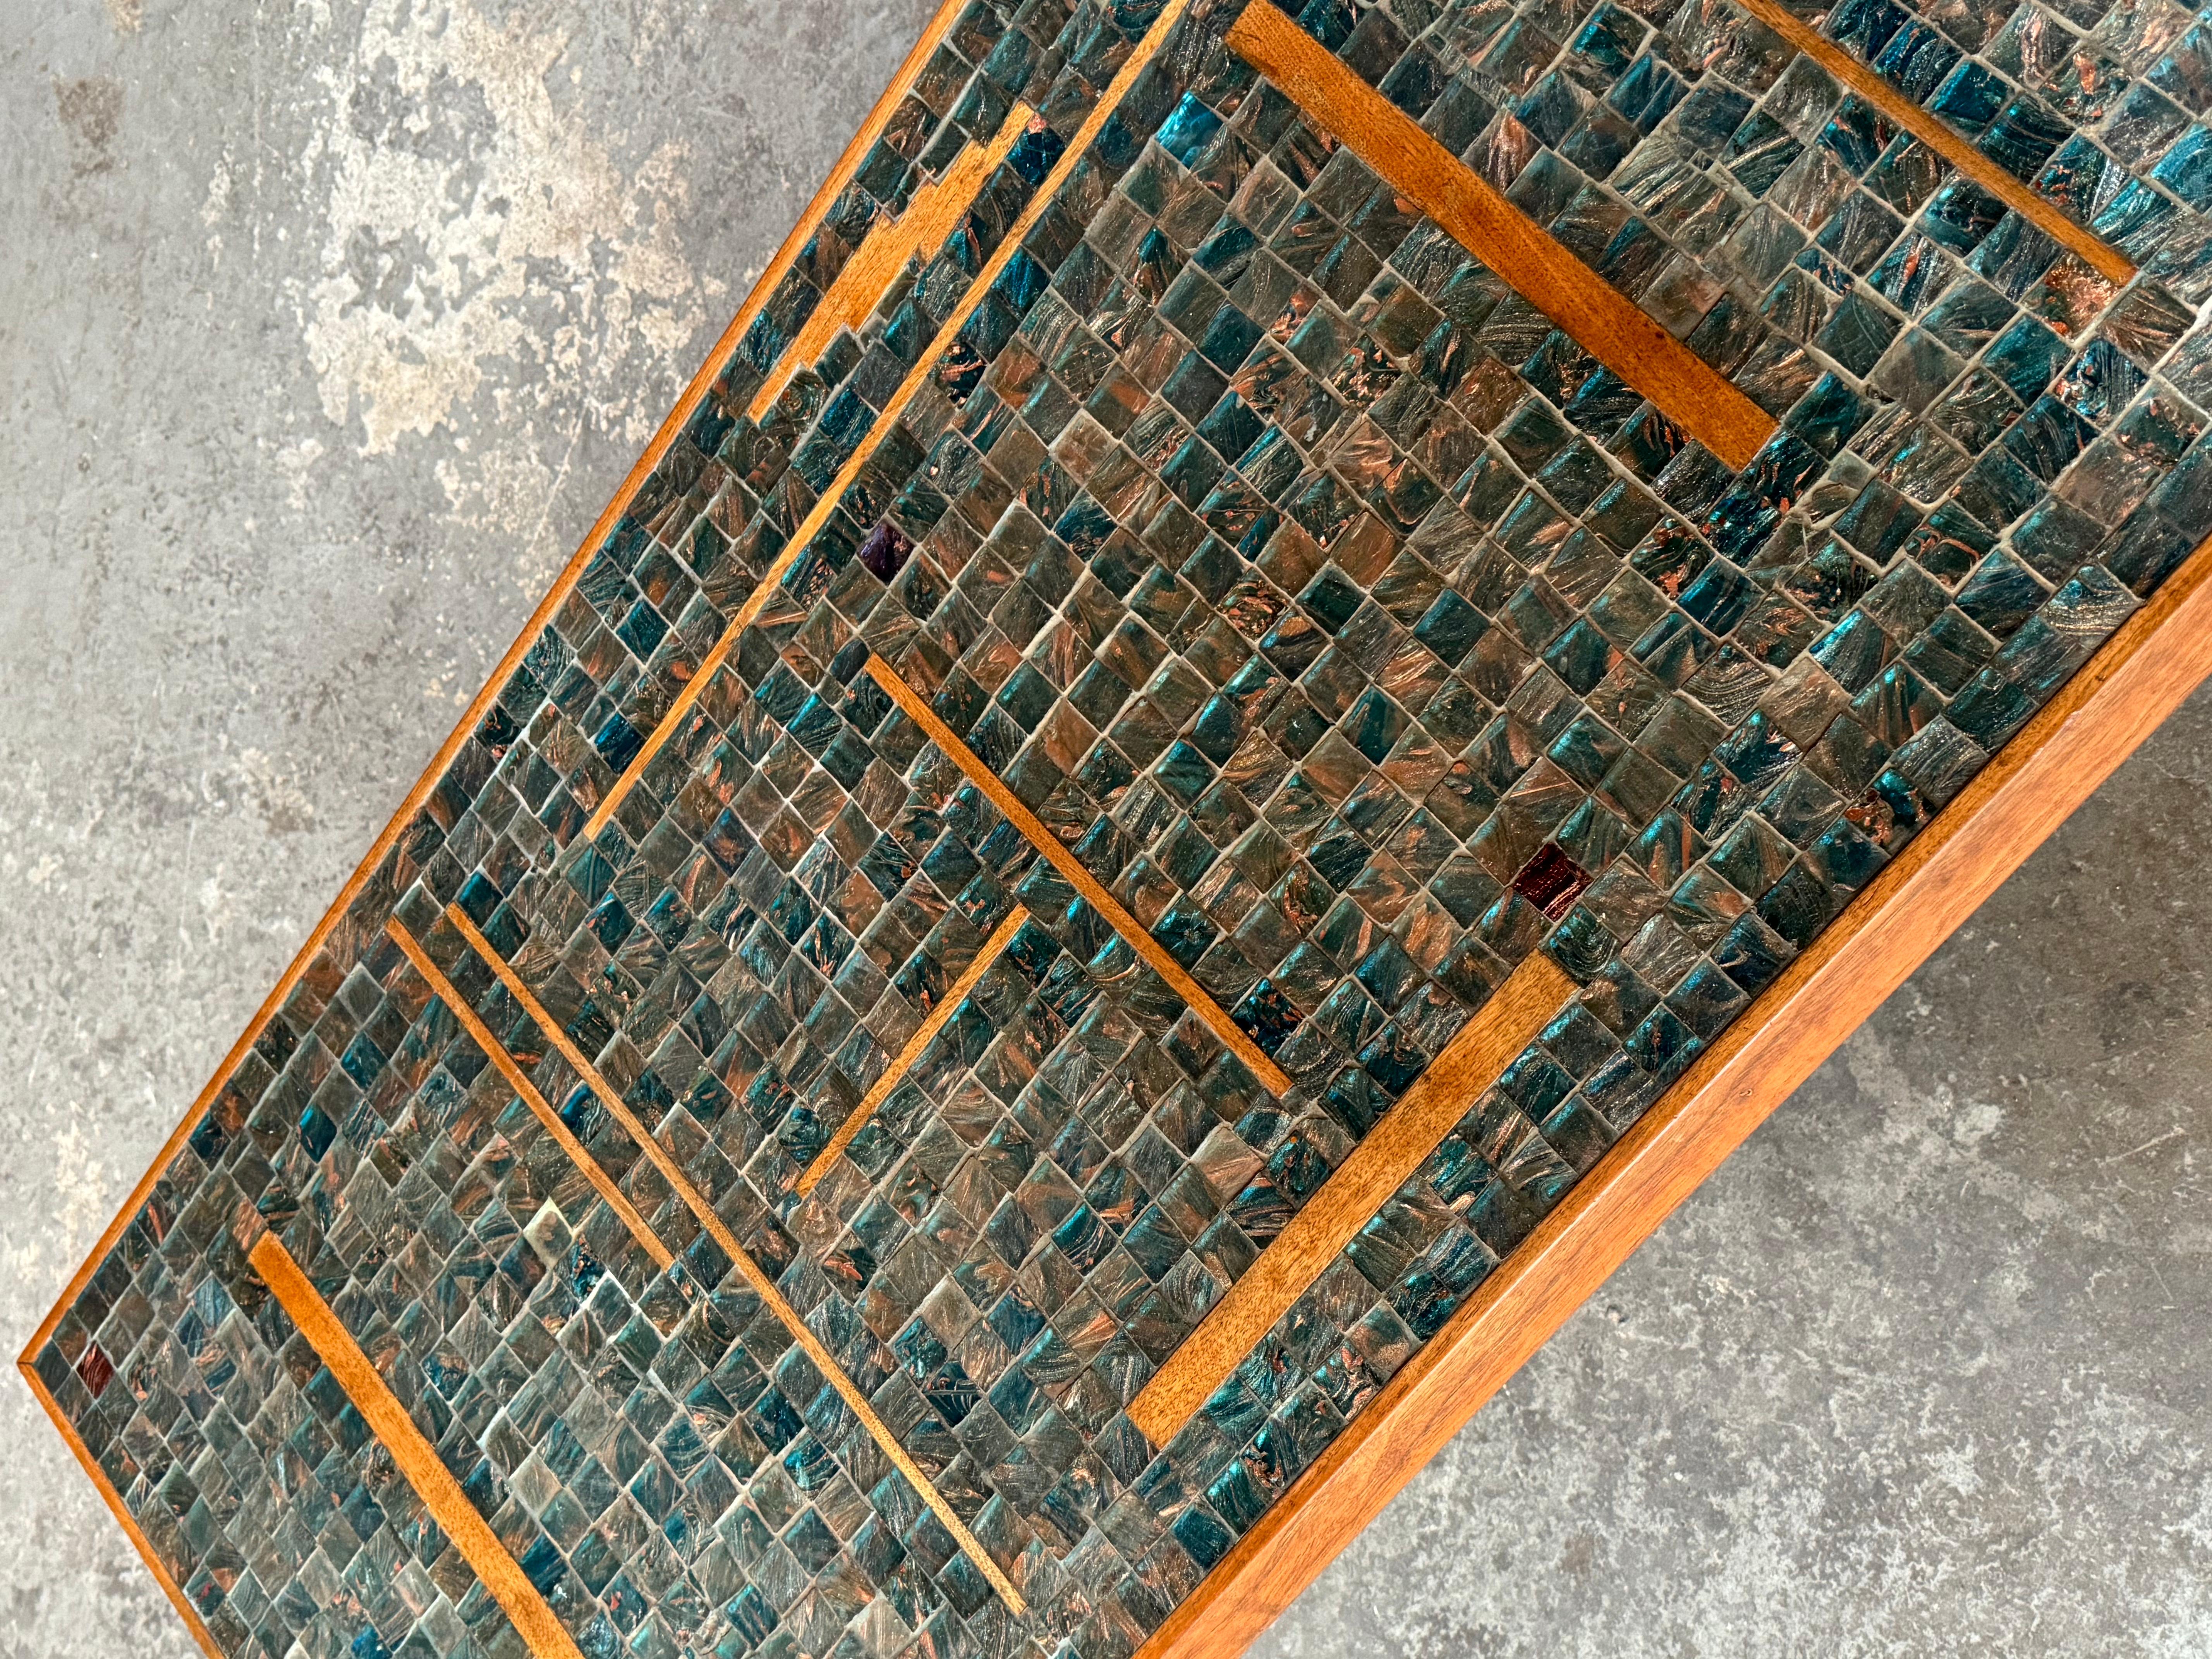 Hand-Crafted 1950s Handmade  Glass Tile Mosaic with Walnut Inlay Coffee Table